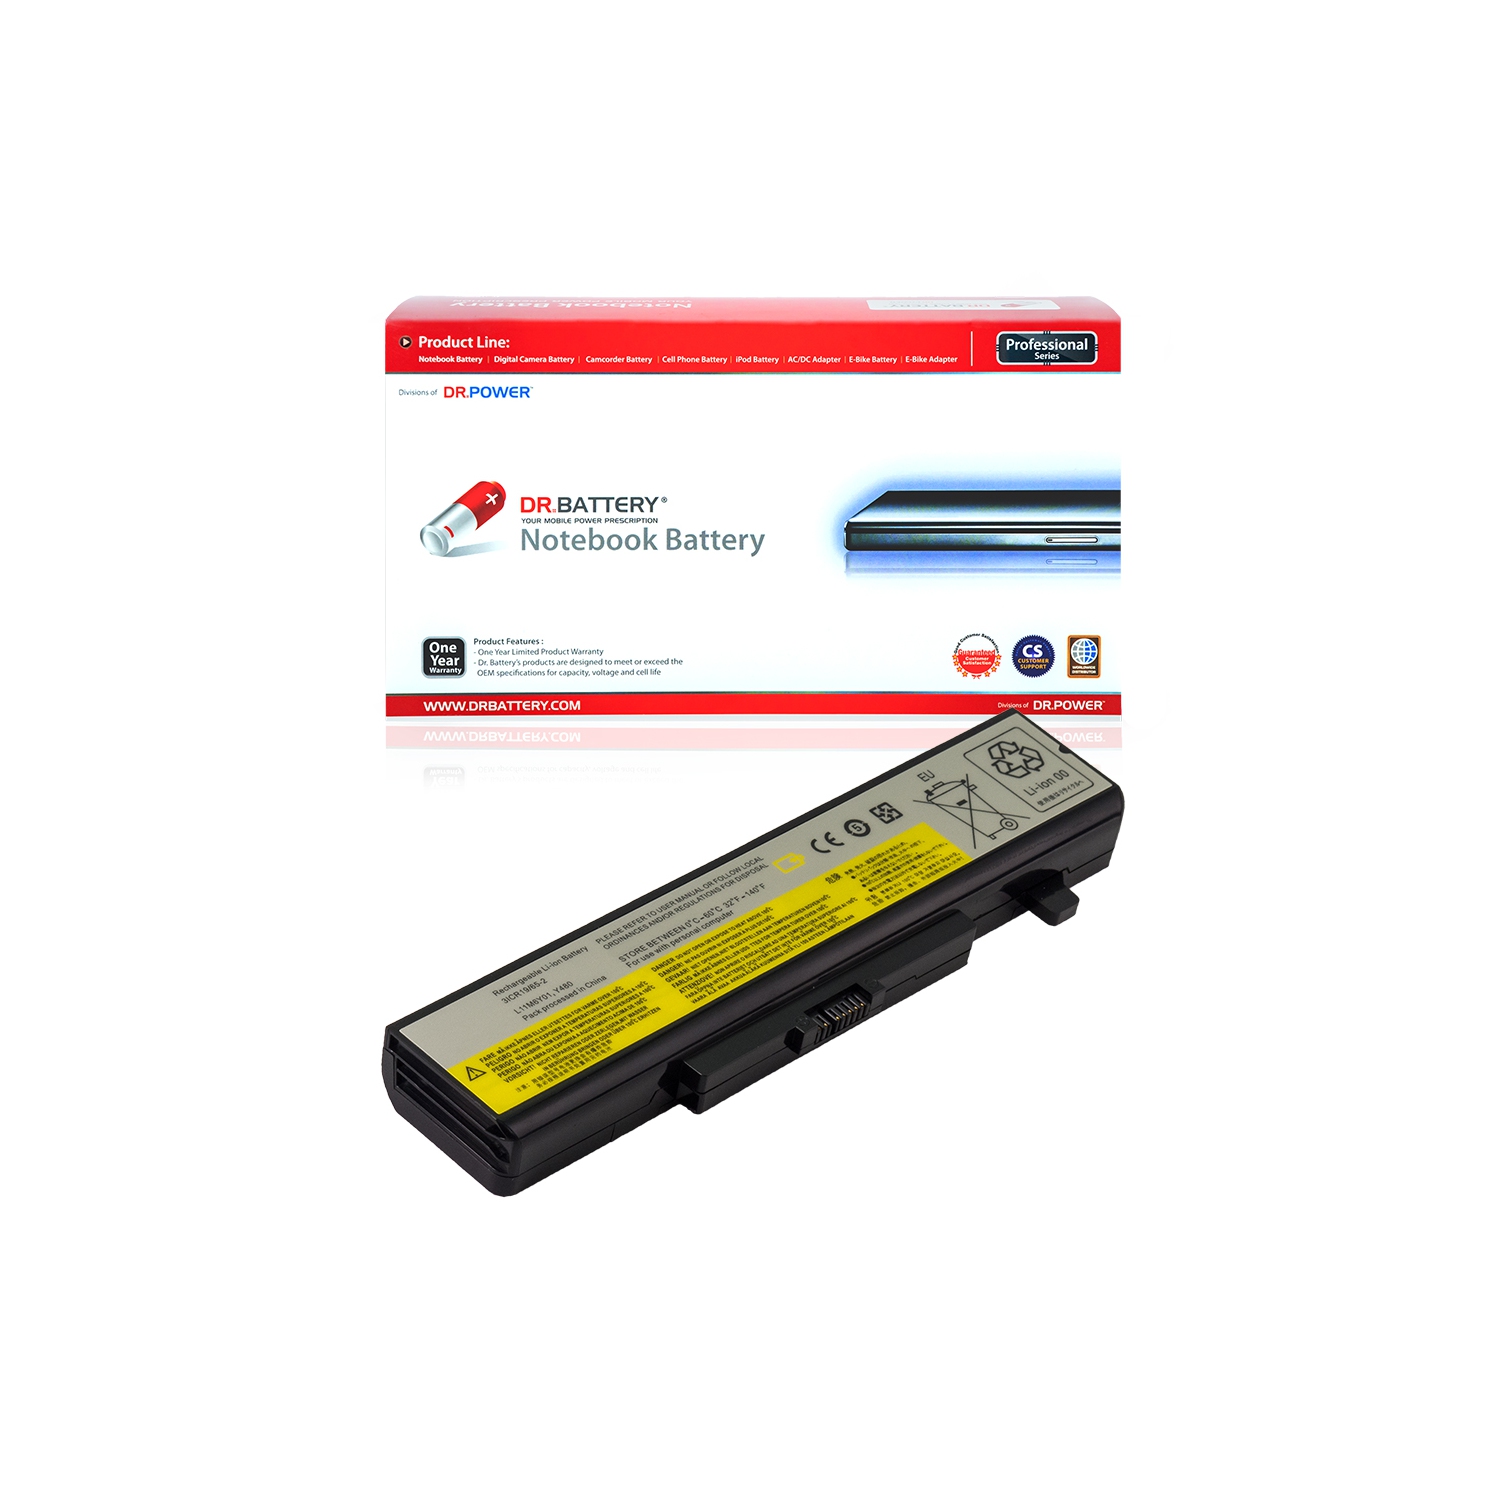 DR. BATTERY - Replacement for Lenovo B580 / B585 / B590 Bolt IV / G480 / G485 / 0A36311 / 0B58693 / 121500047 / 121500048